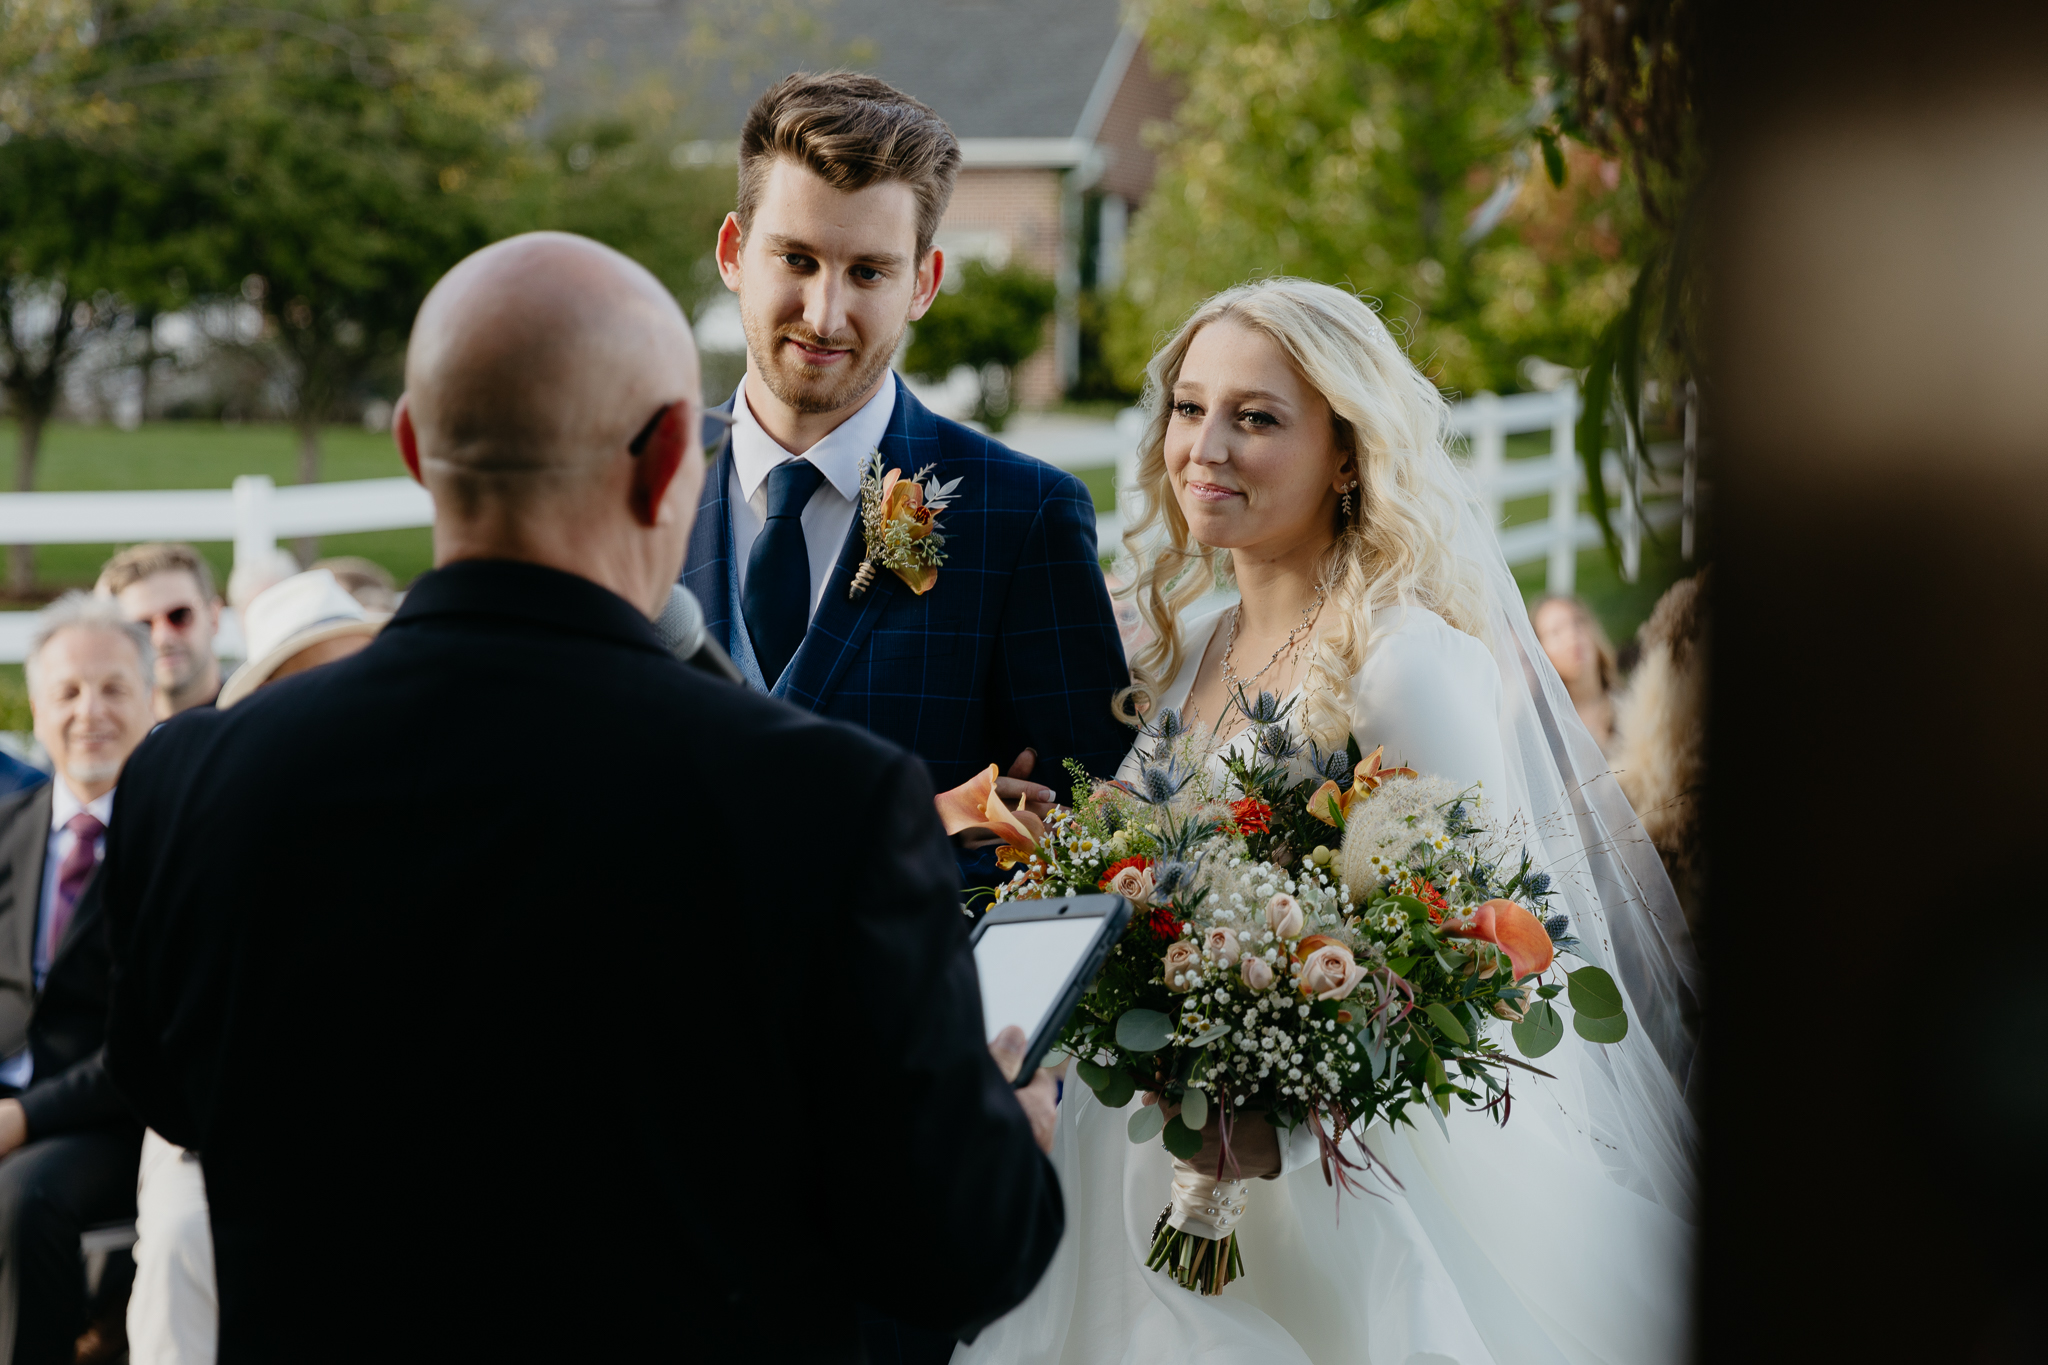 Bride and groom smiling and listening at the altar of their outdoor fall wedding ceremony at Northfork Farm